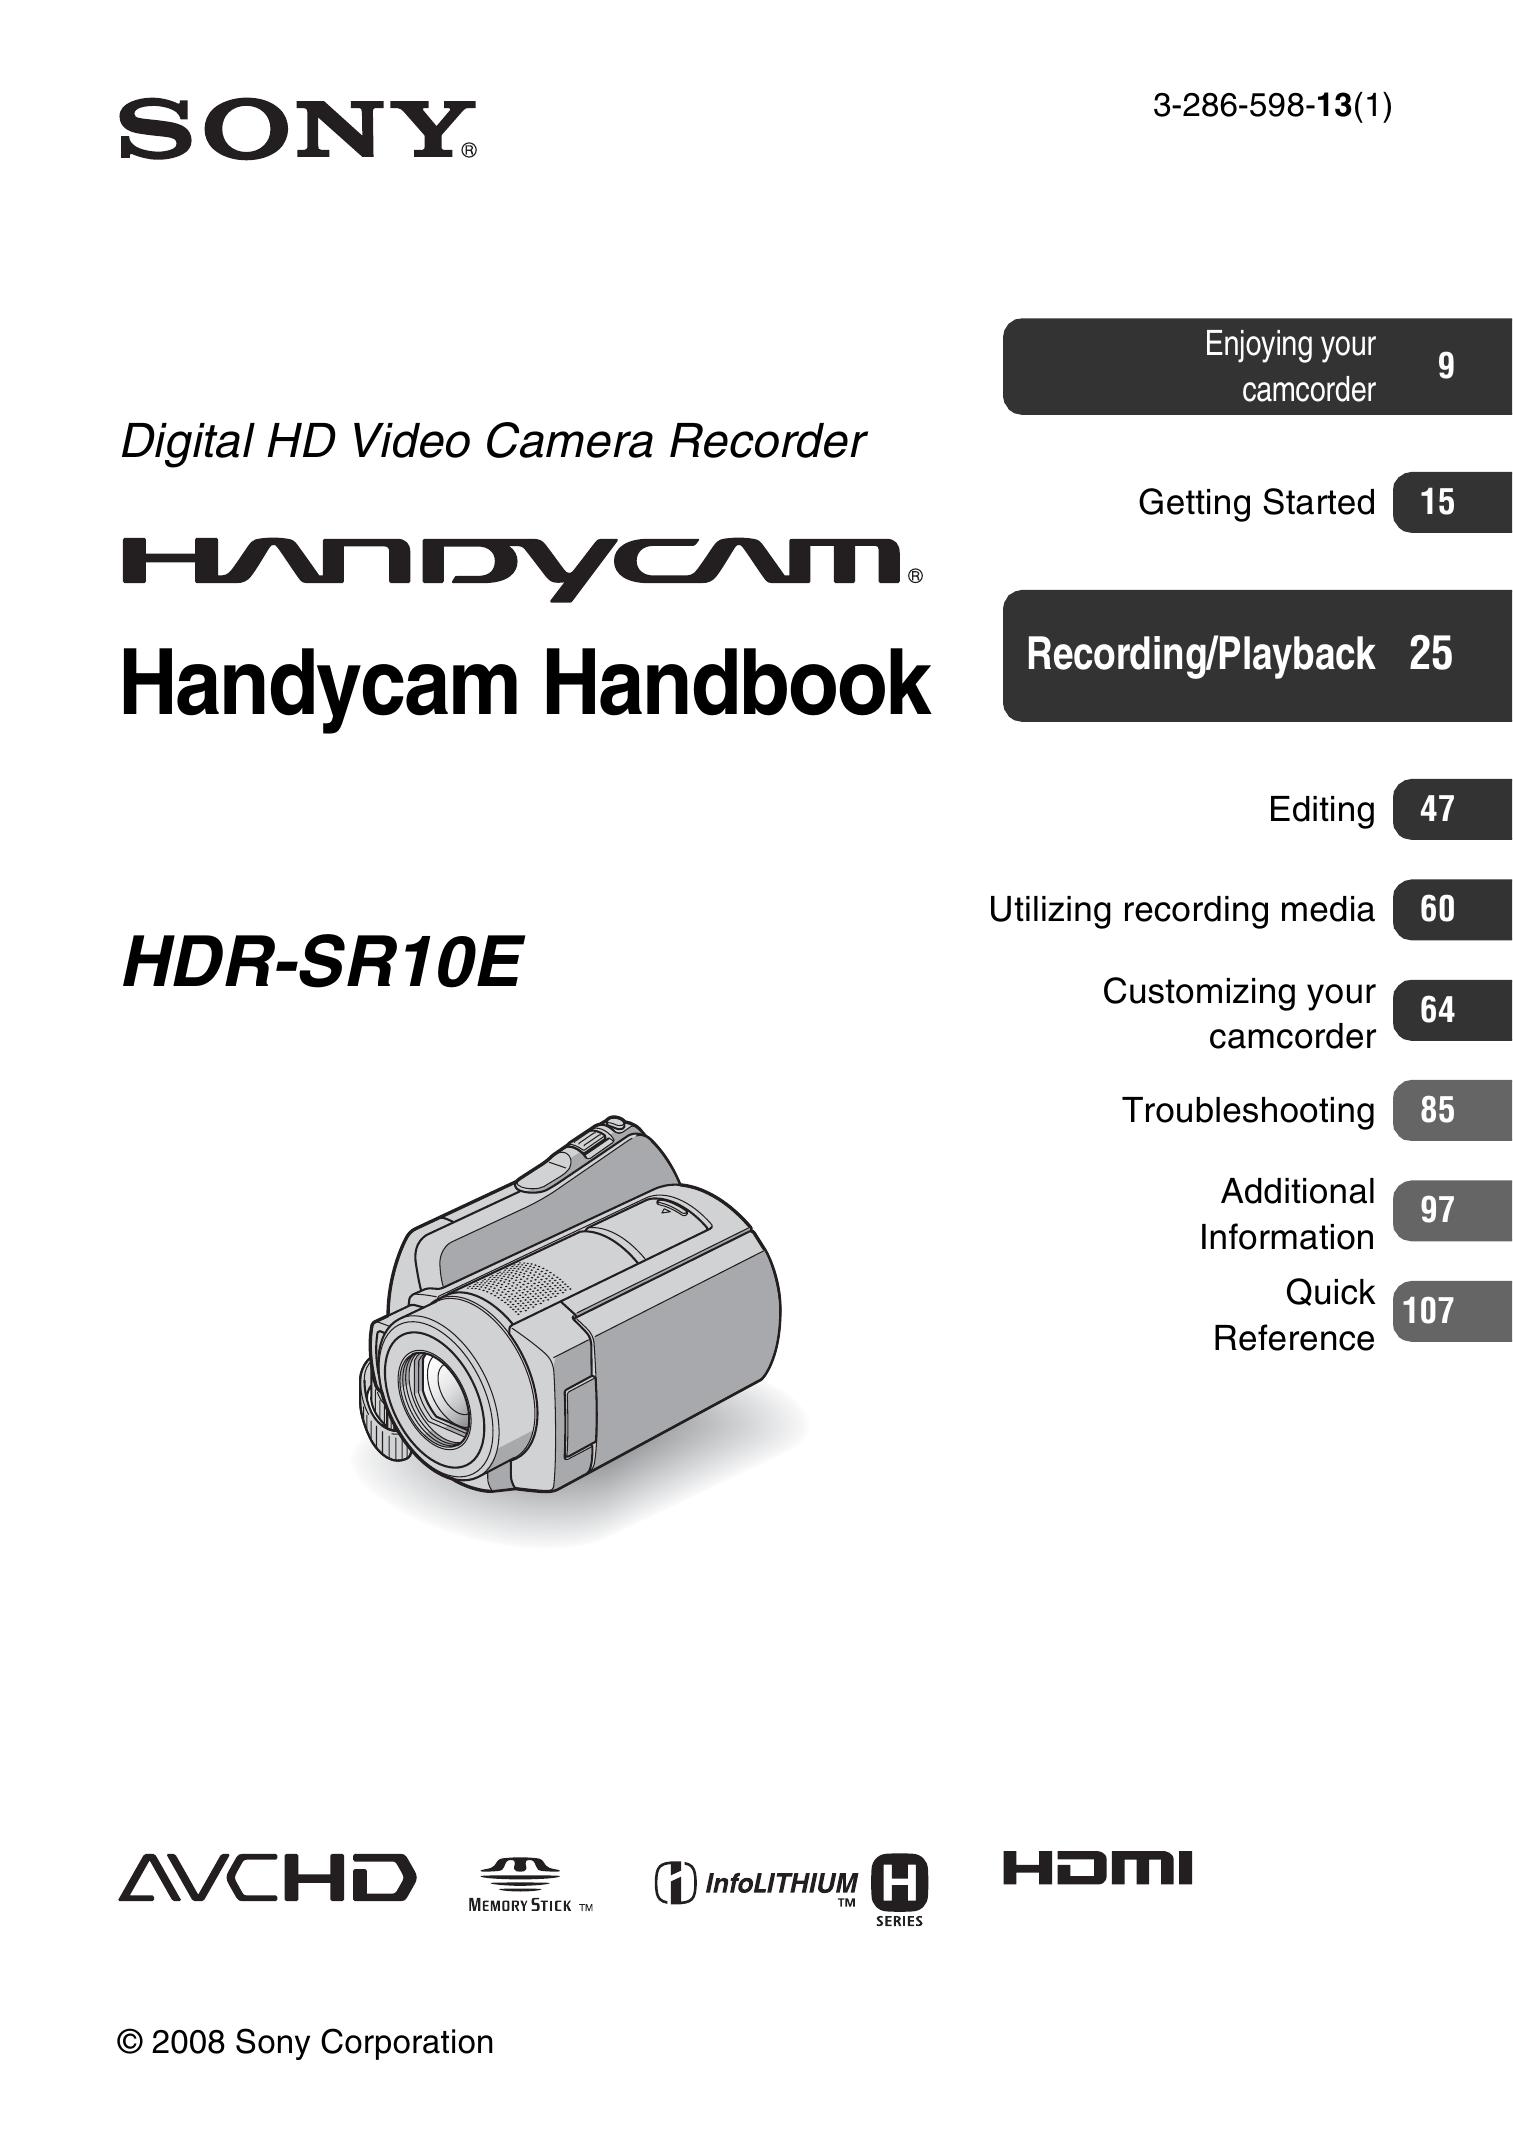 Sony 3-286-598-13(1) Camcorder User Manual